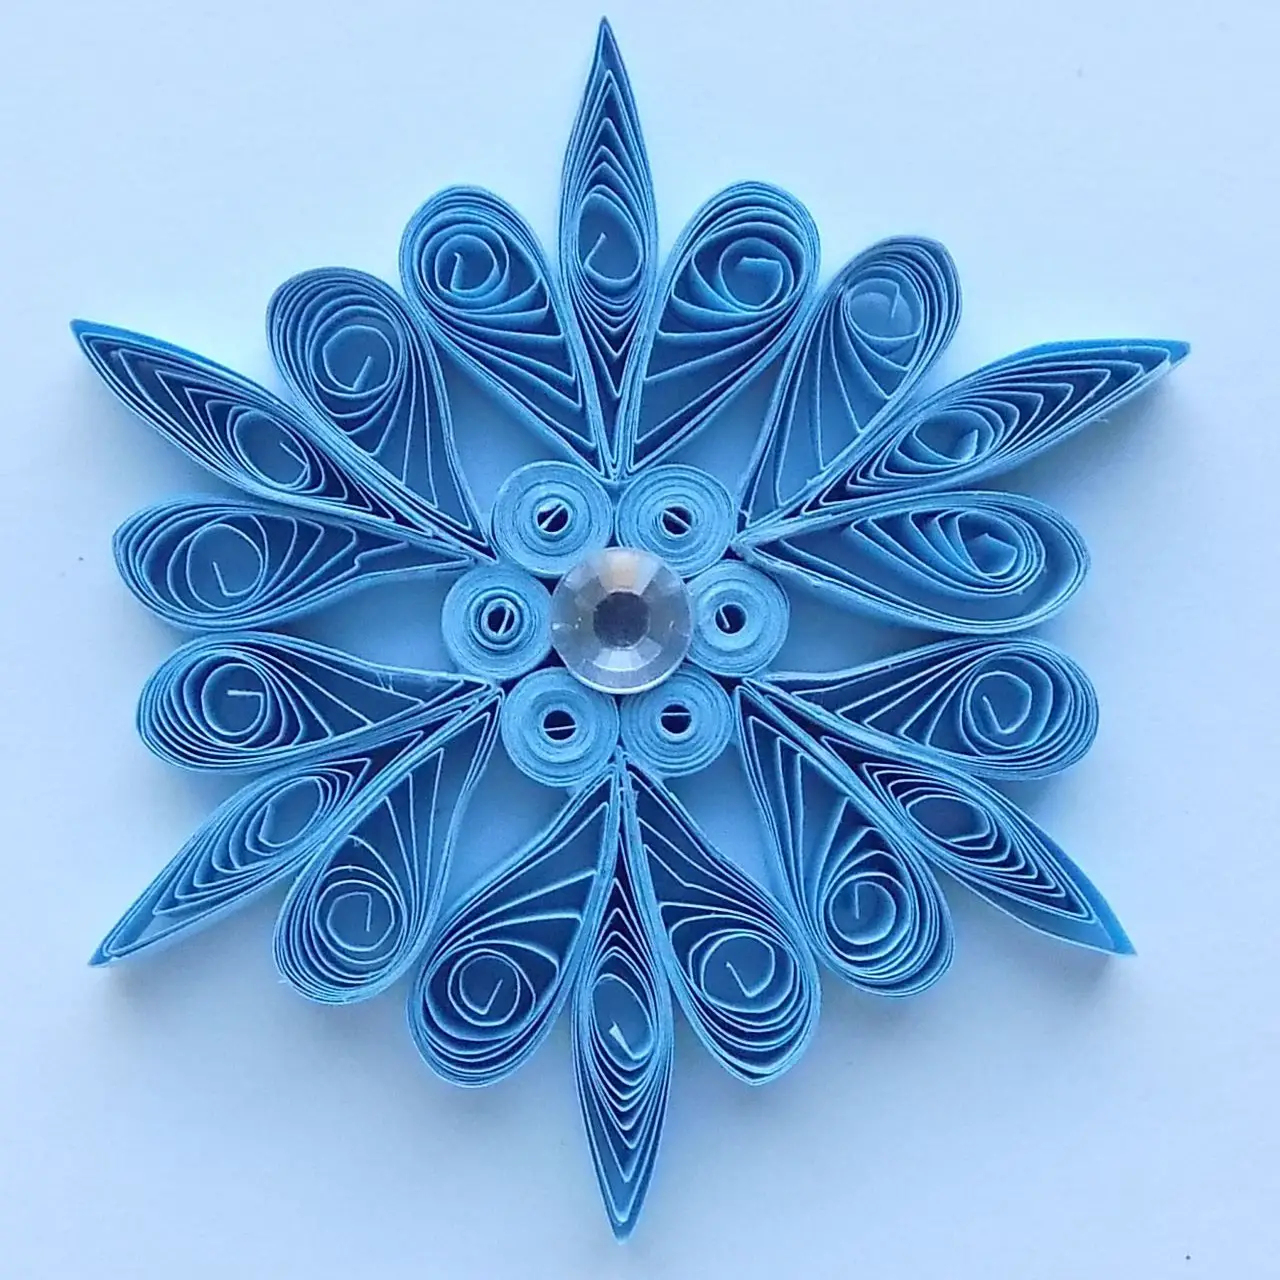 15 Easy Paper Quilling Patterns For Beginners - Free Quilling Designs